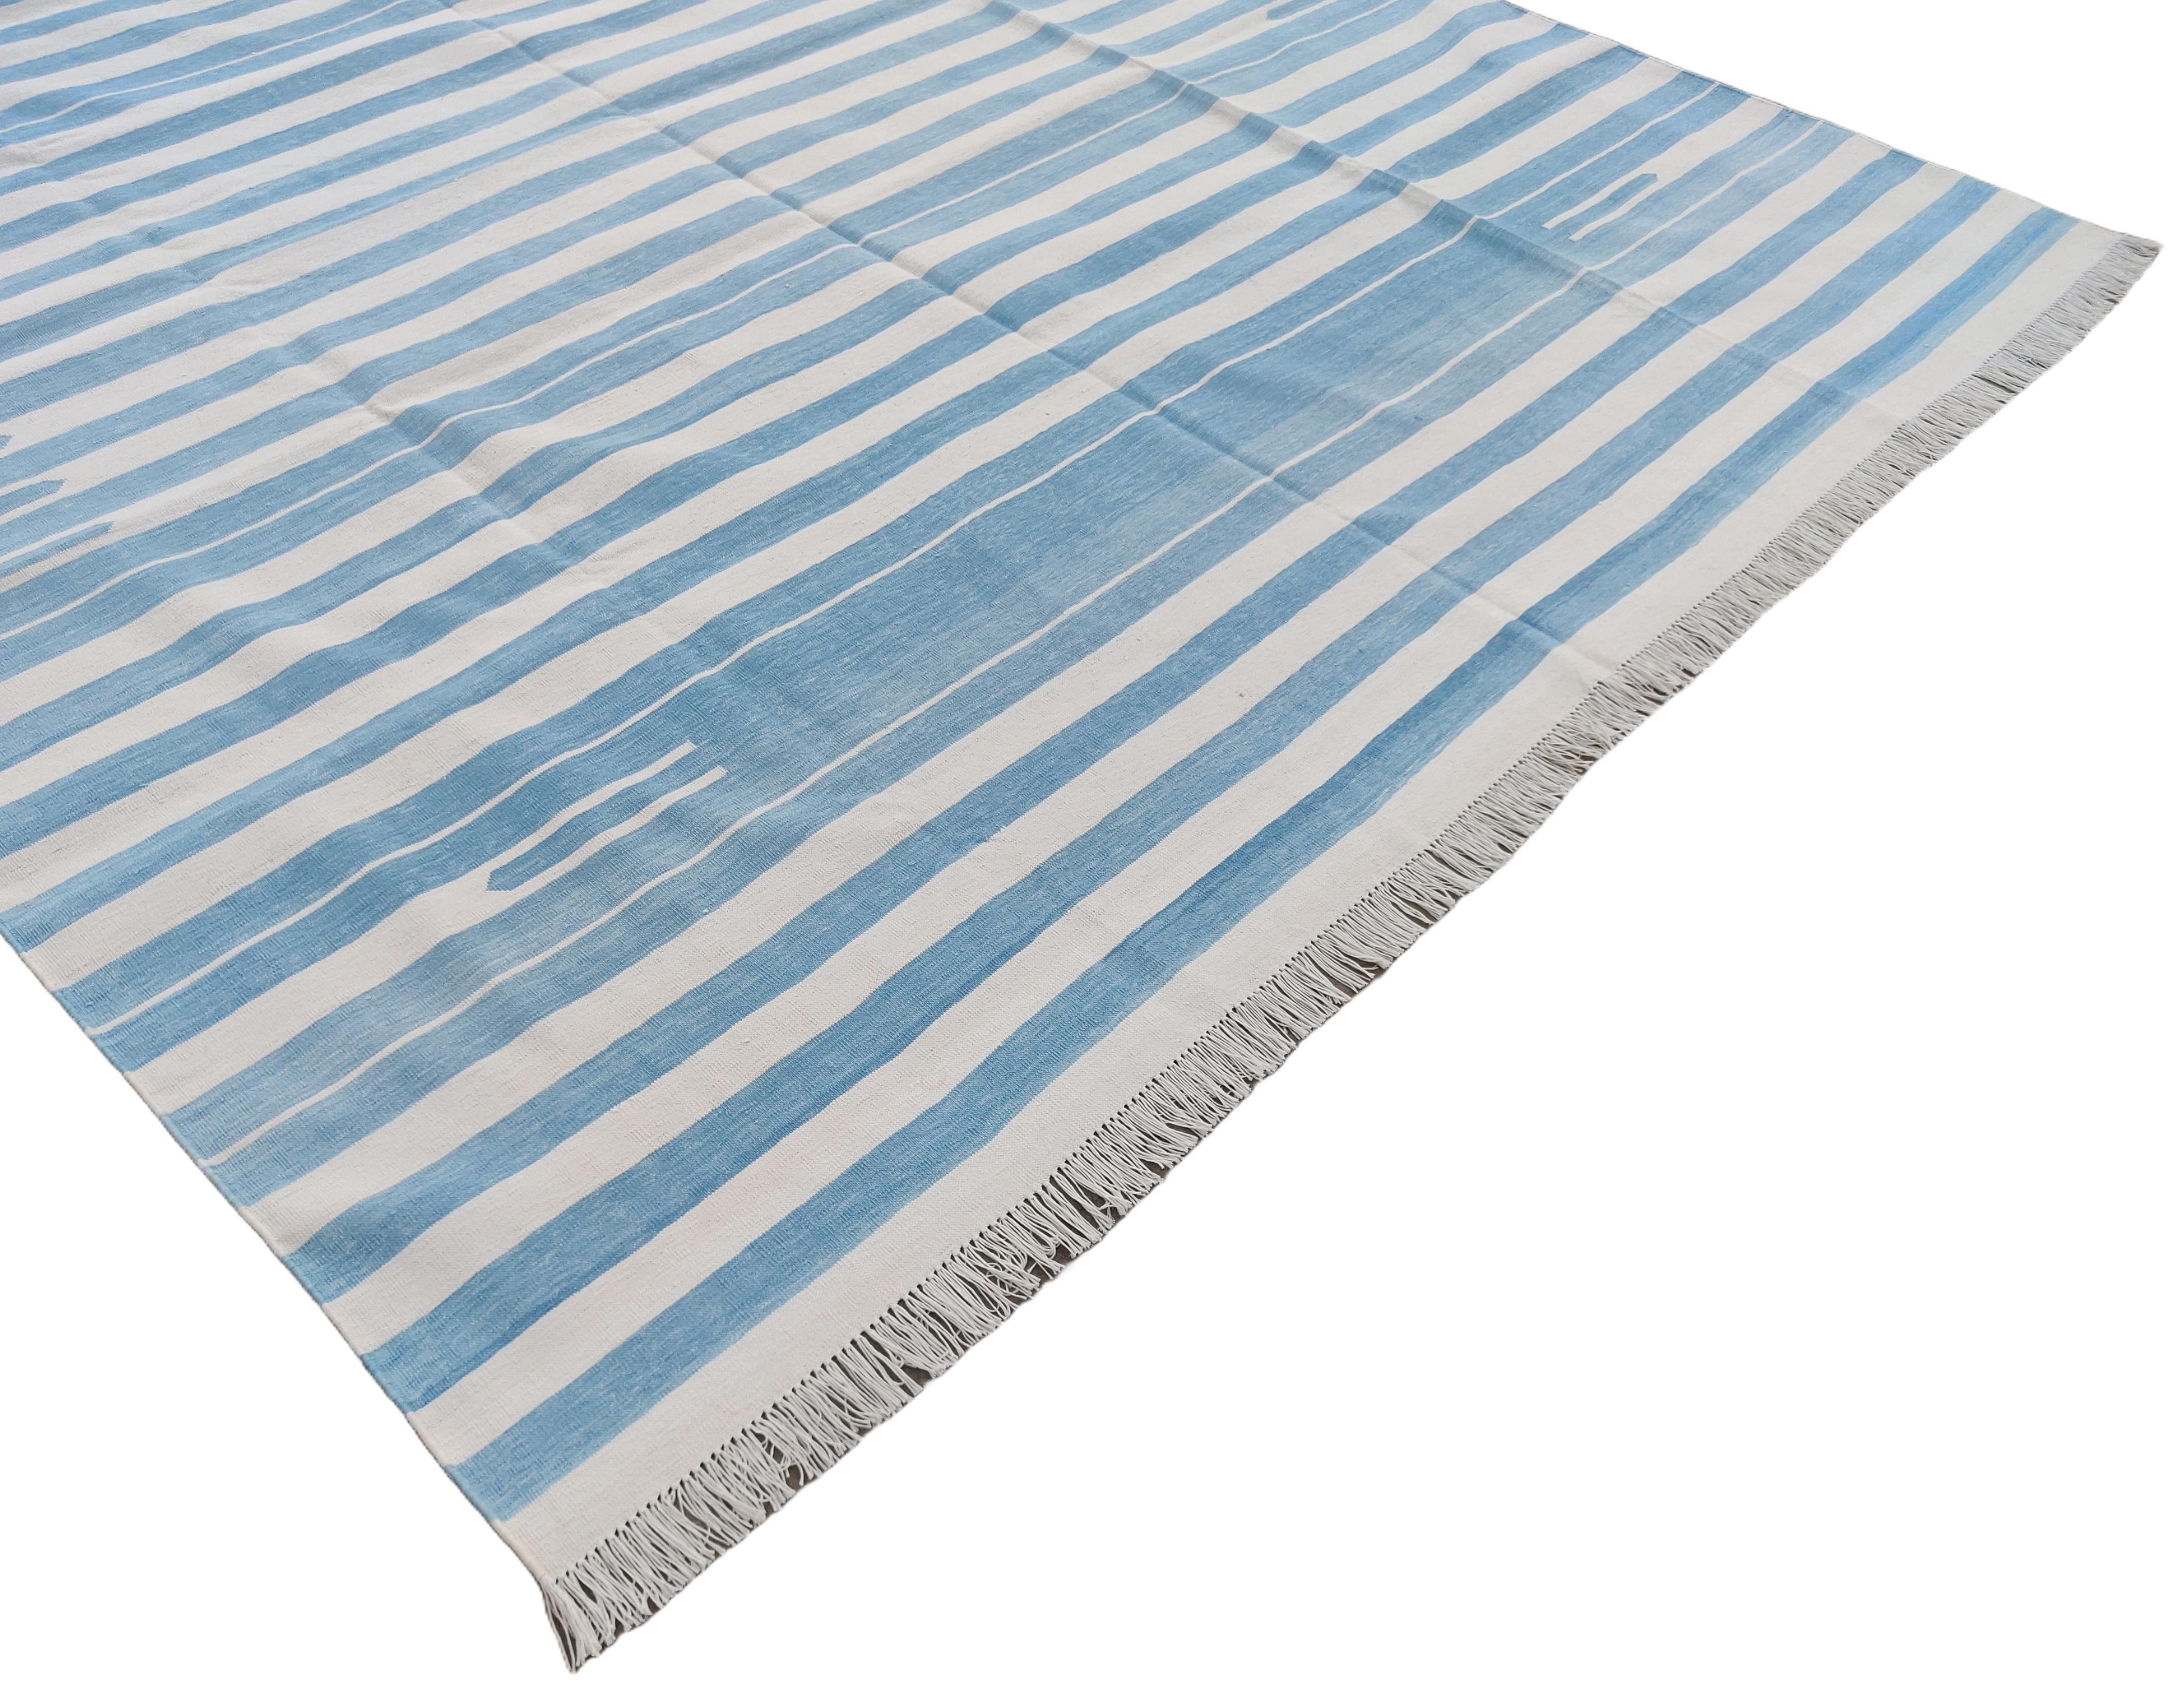 Mid-Century Modern Handmade Cotton Area Flat Weave Rug, Blue And White Striped Indian Dhurrie Rug For Sale